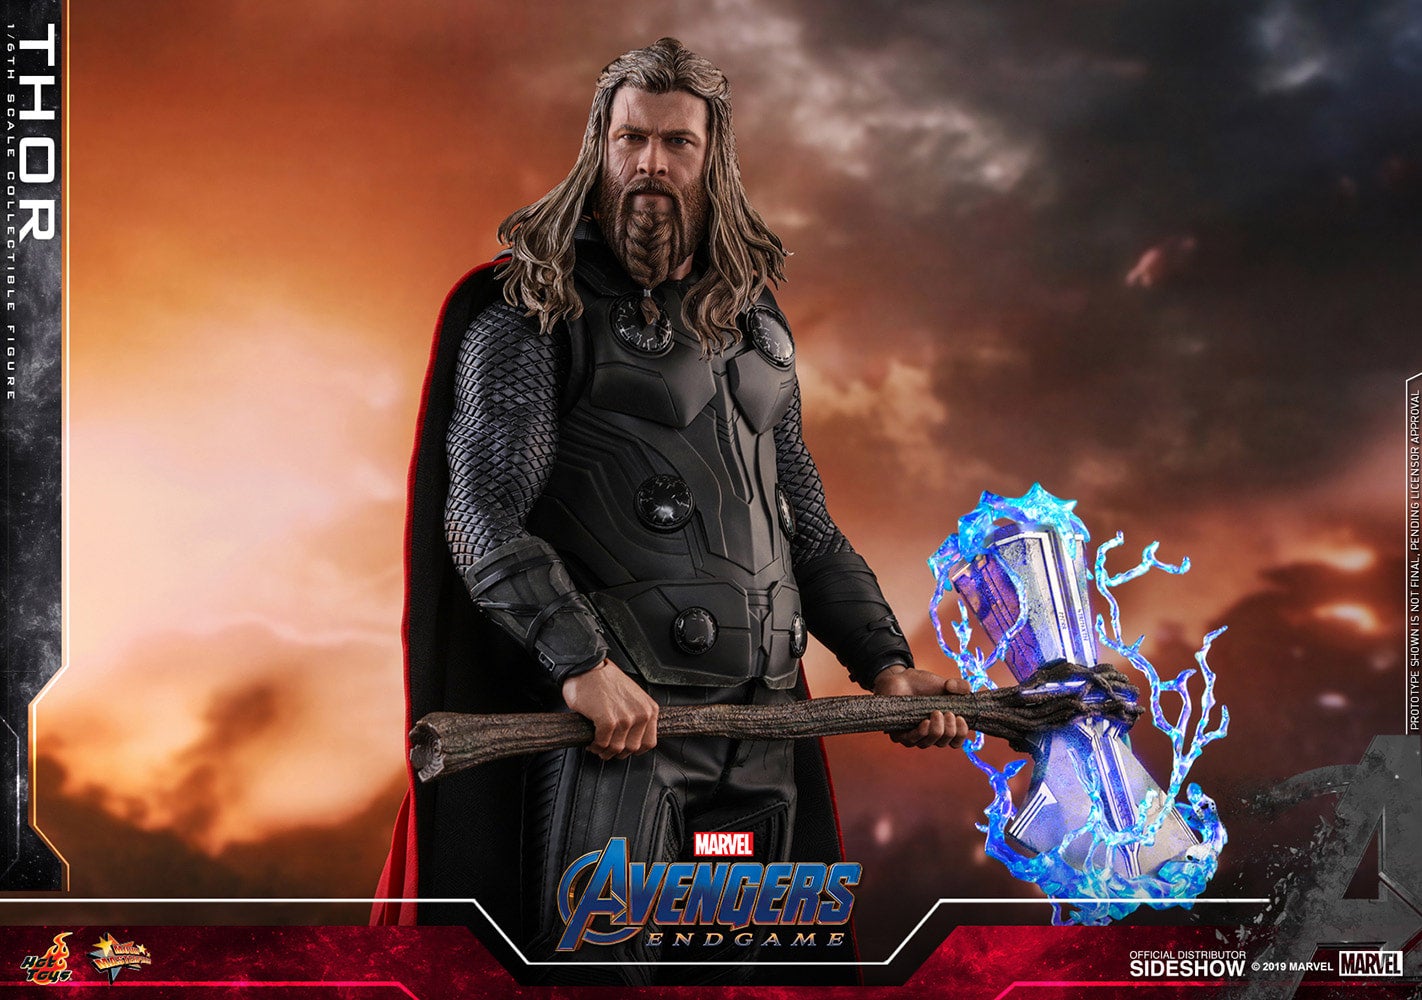 Hot Toys Thor Sixth Scale Figure